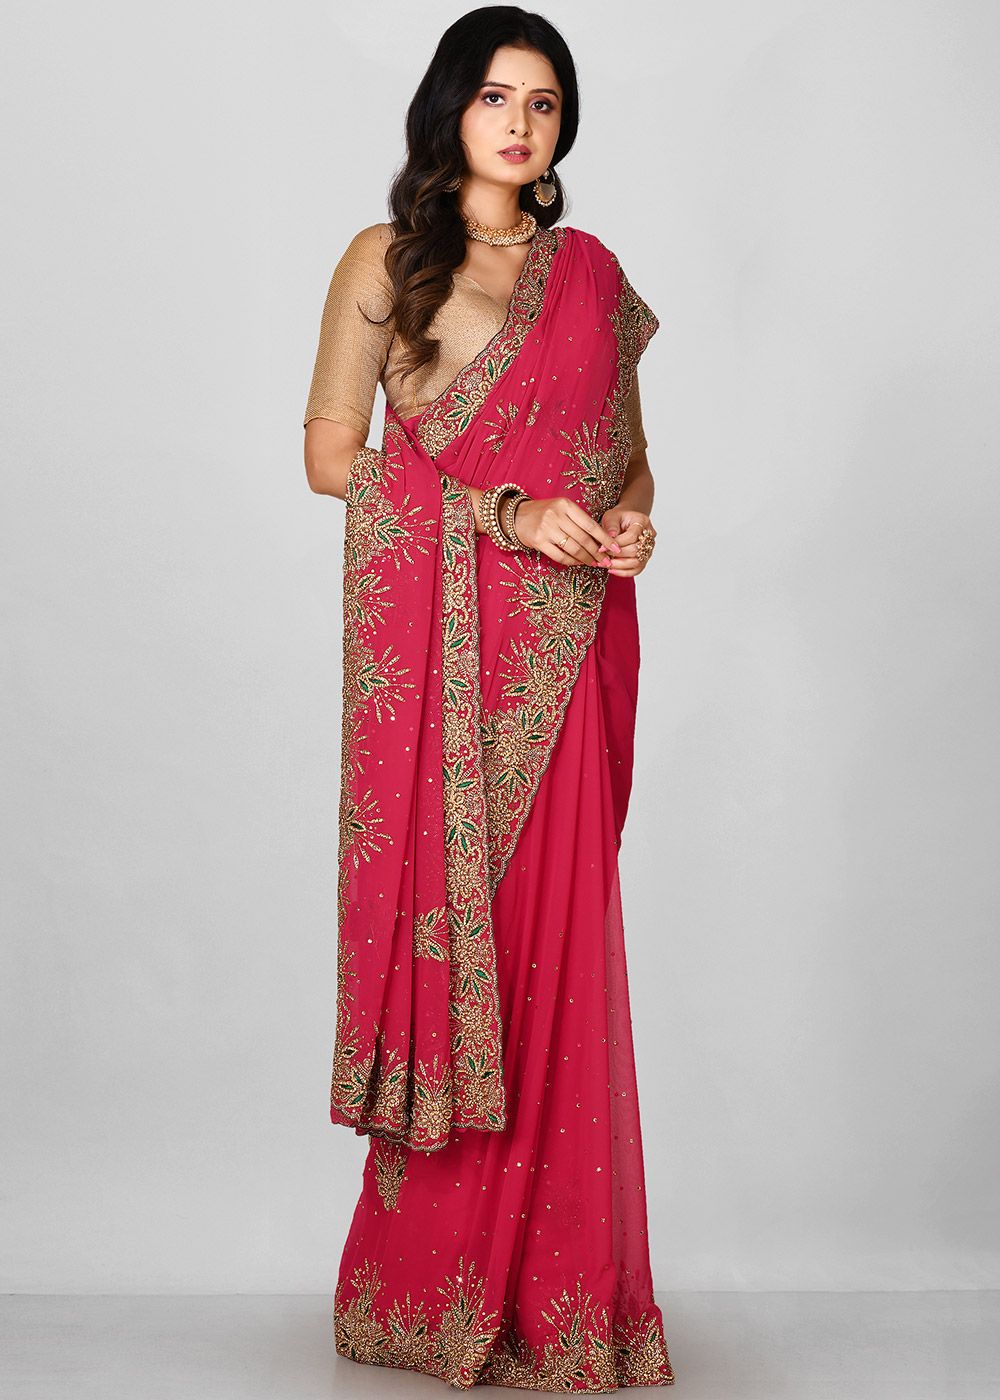 Model Silk Party Wear Saree In Pink WIth Embroidery Work & Crystal Stone  work - Saree